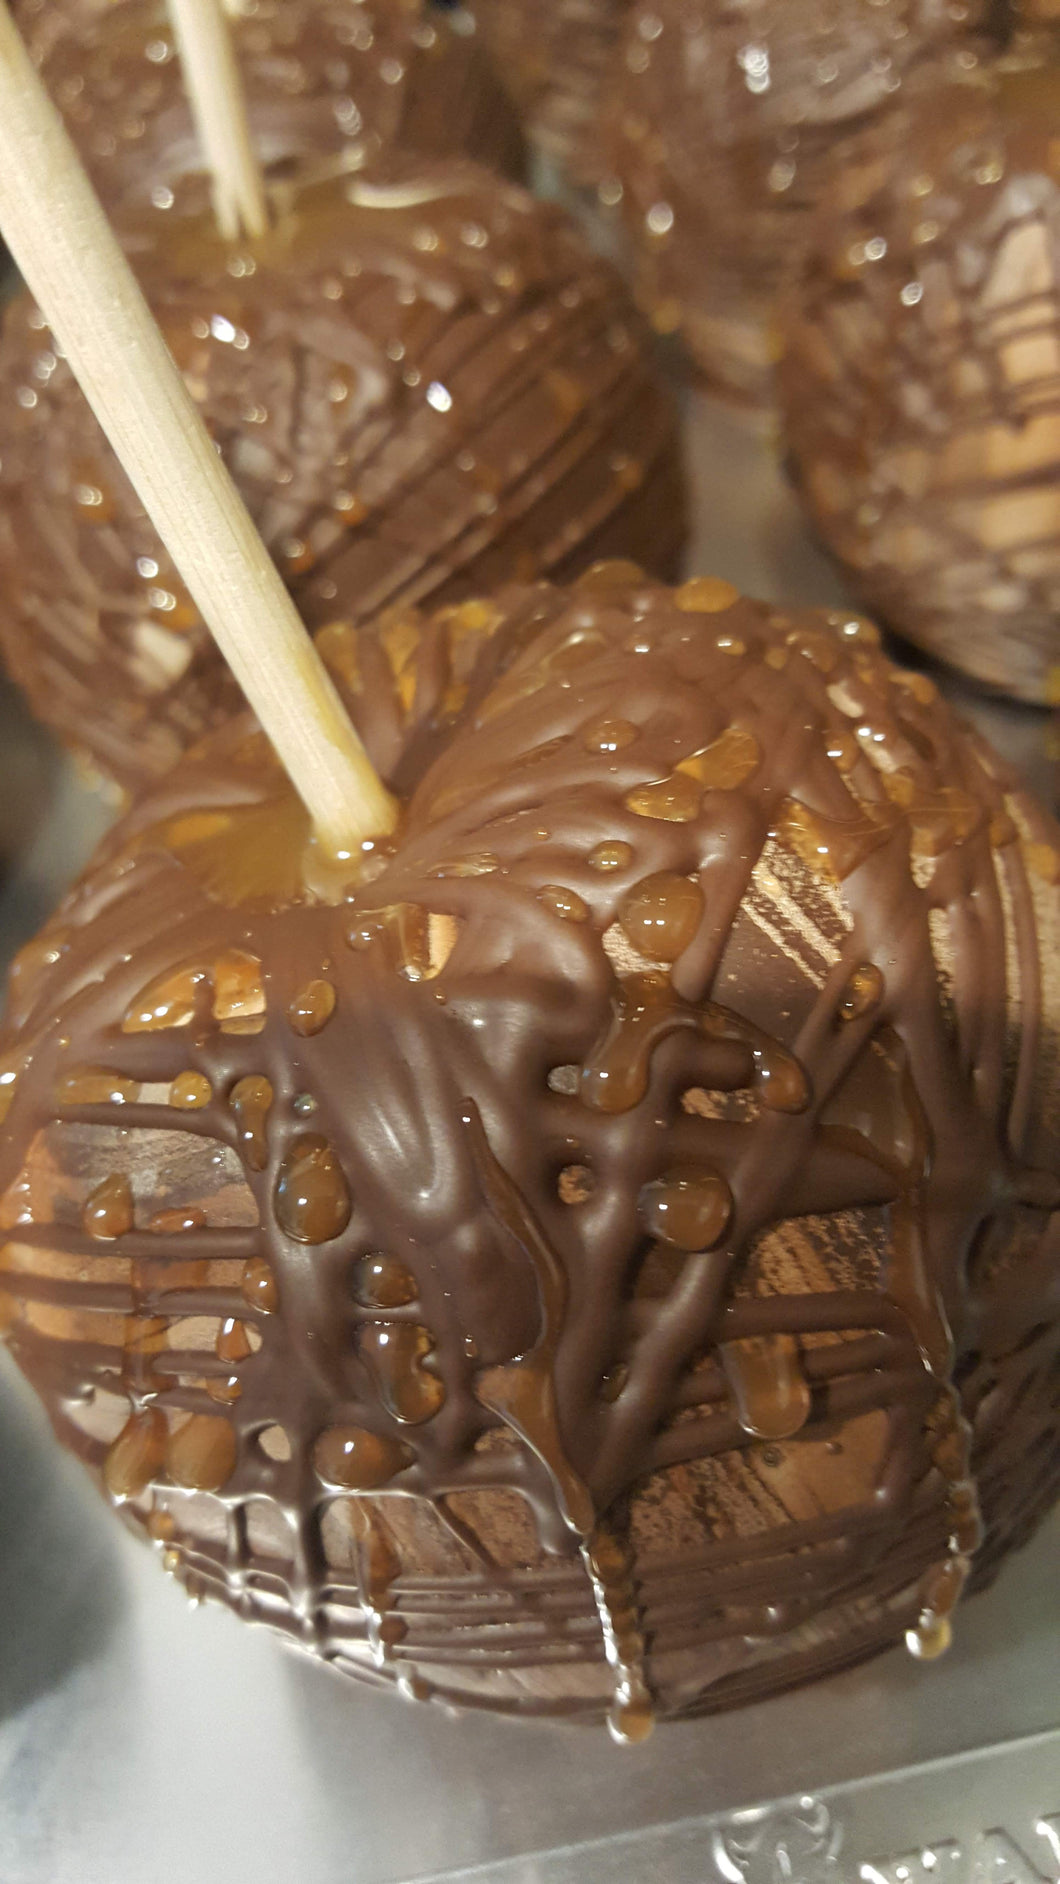 Apples – Chocolate Covered/Dipped (Caramel Drizzle)